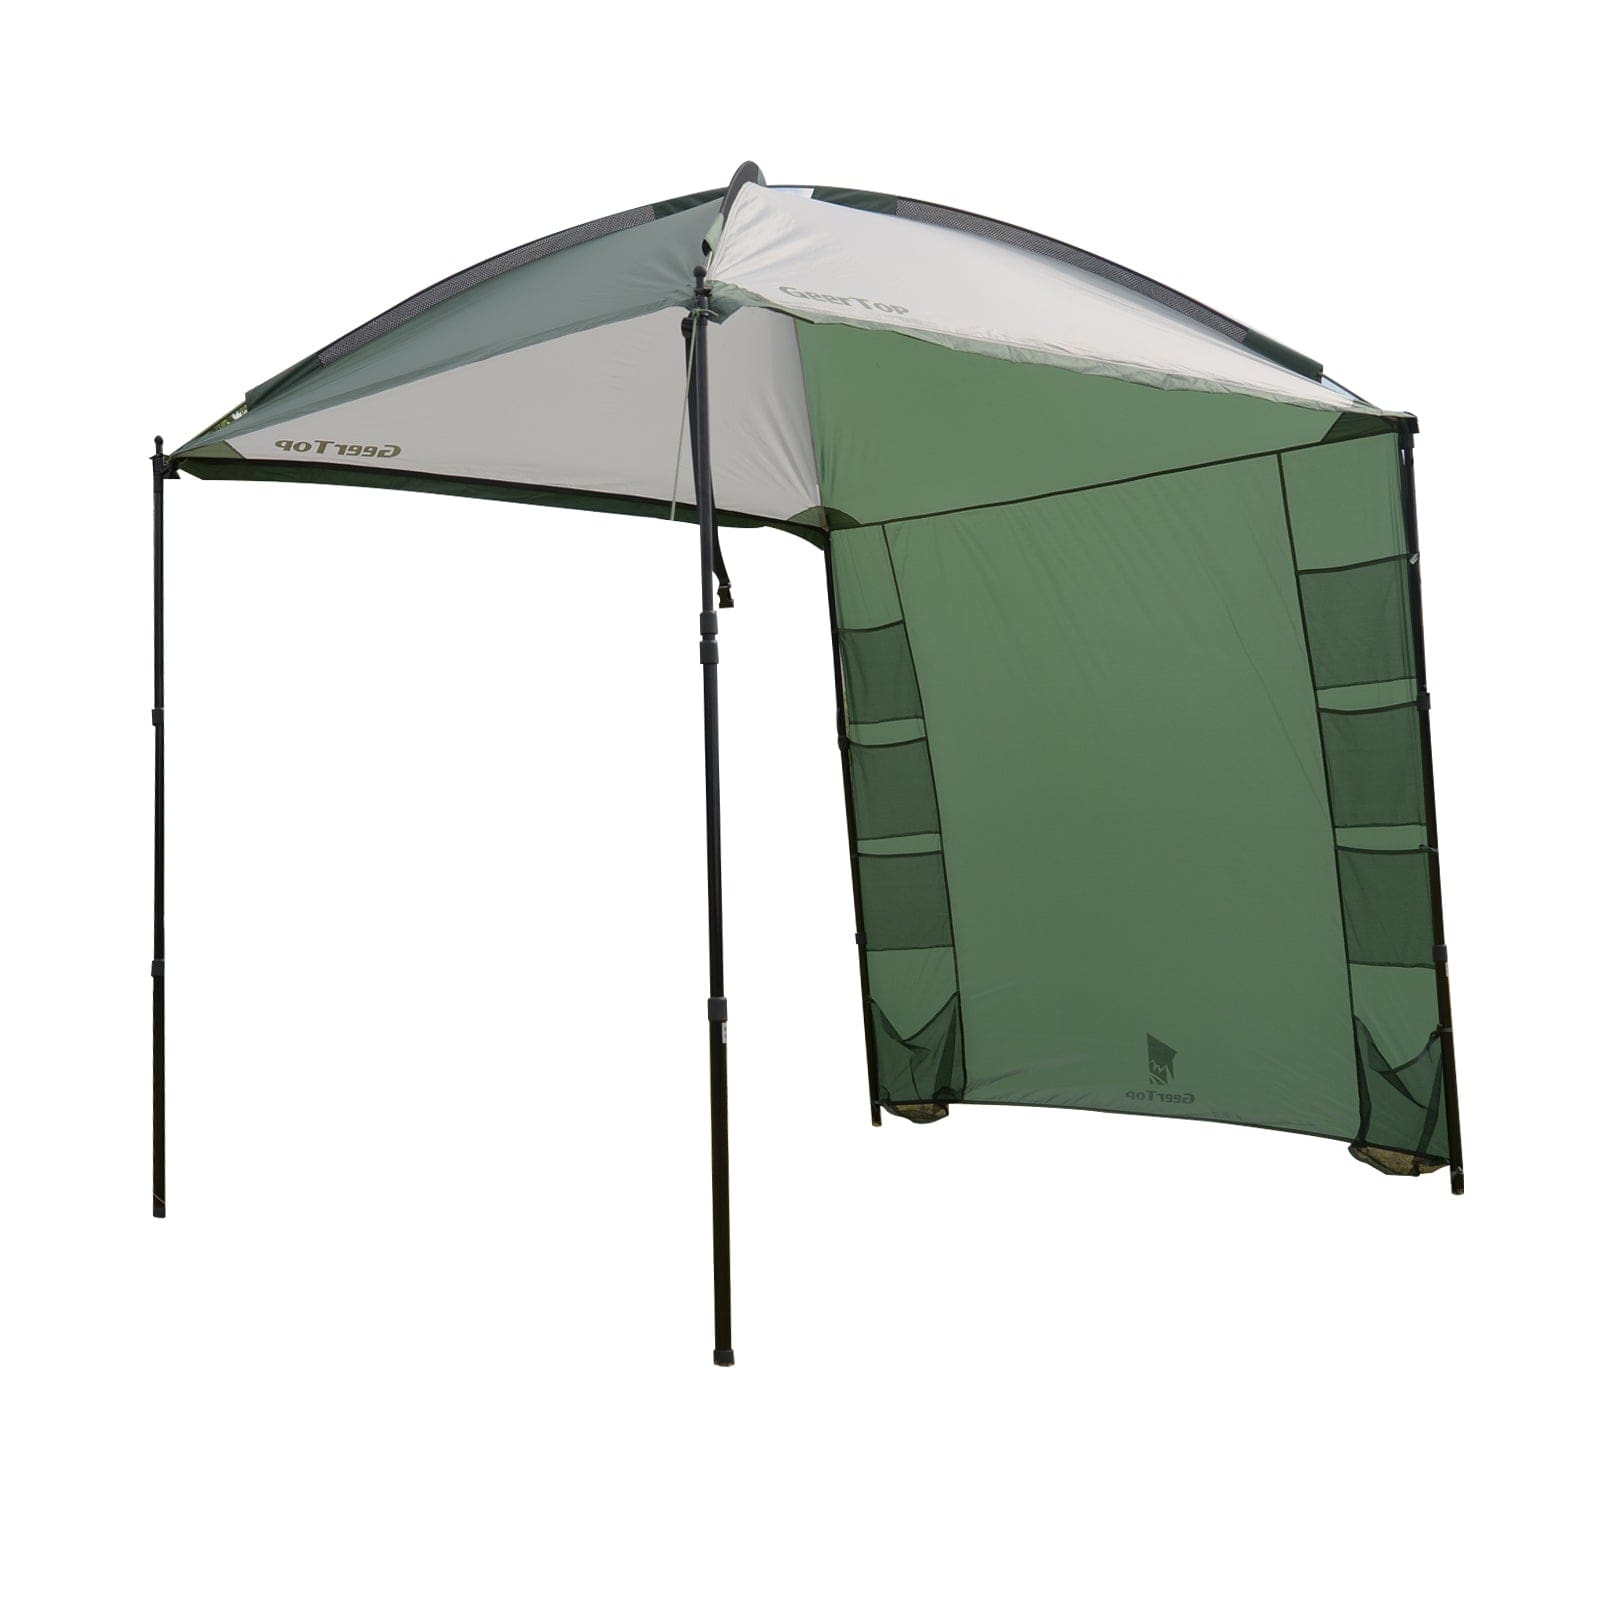 GeerTop Outdoor Store Canopy GeerTop Awning Canopy For Family Car Camping